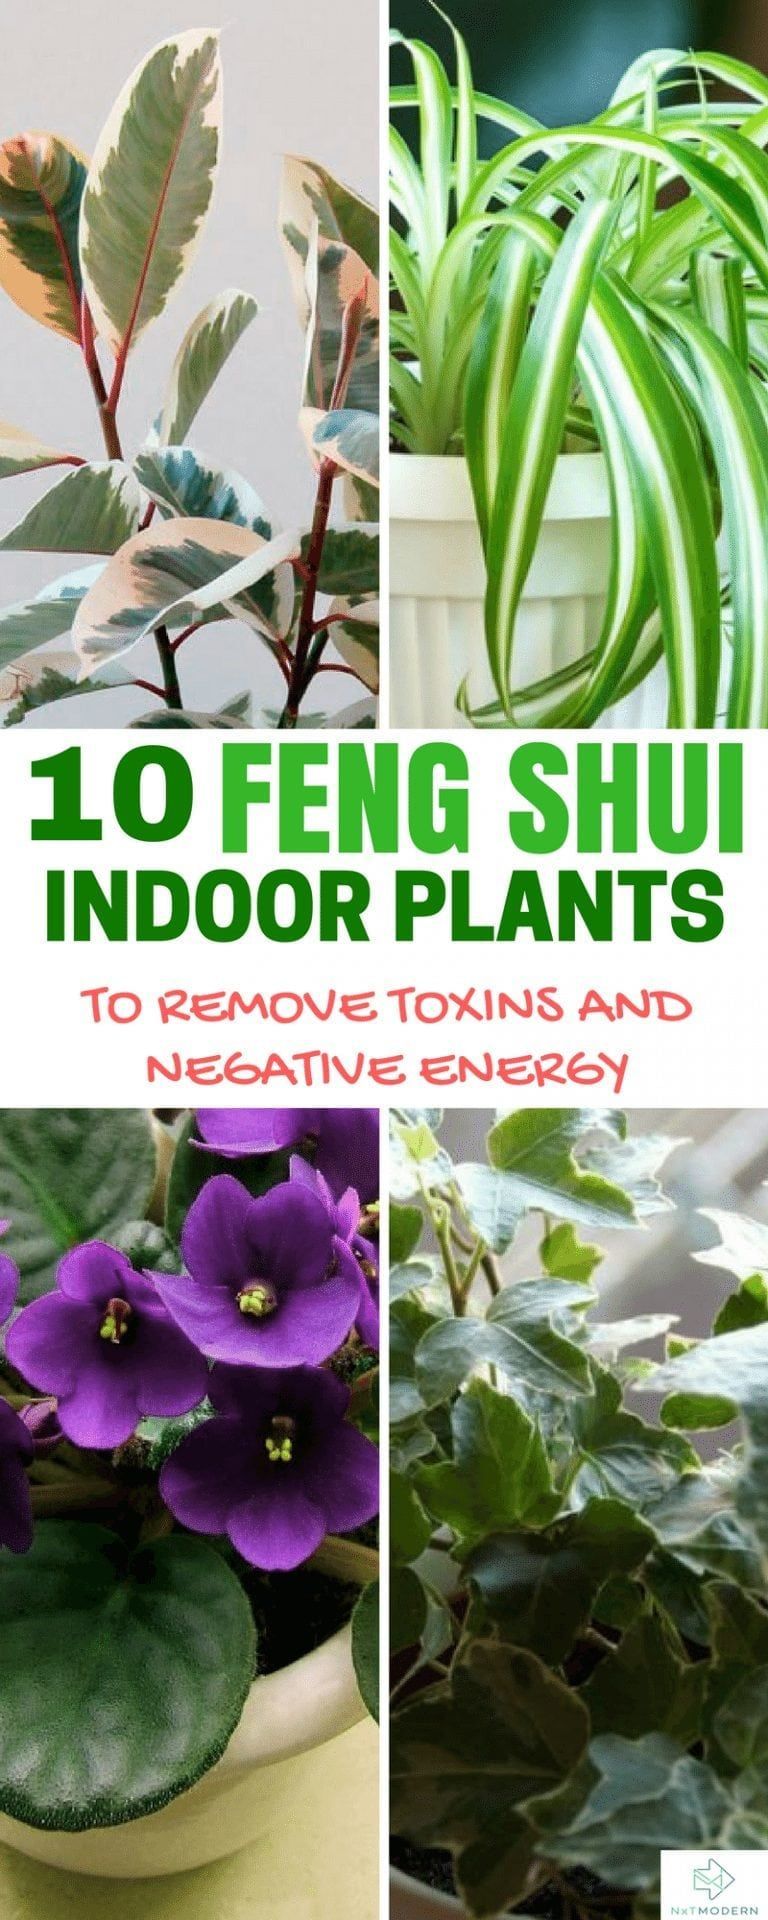 10 Feng Shui Indoor Plants to Spruce Up Your Interior Decor -   15 plants Indoor spaces
 ideas